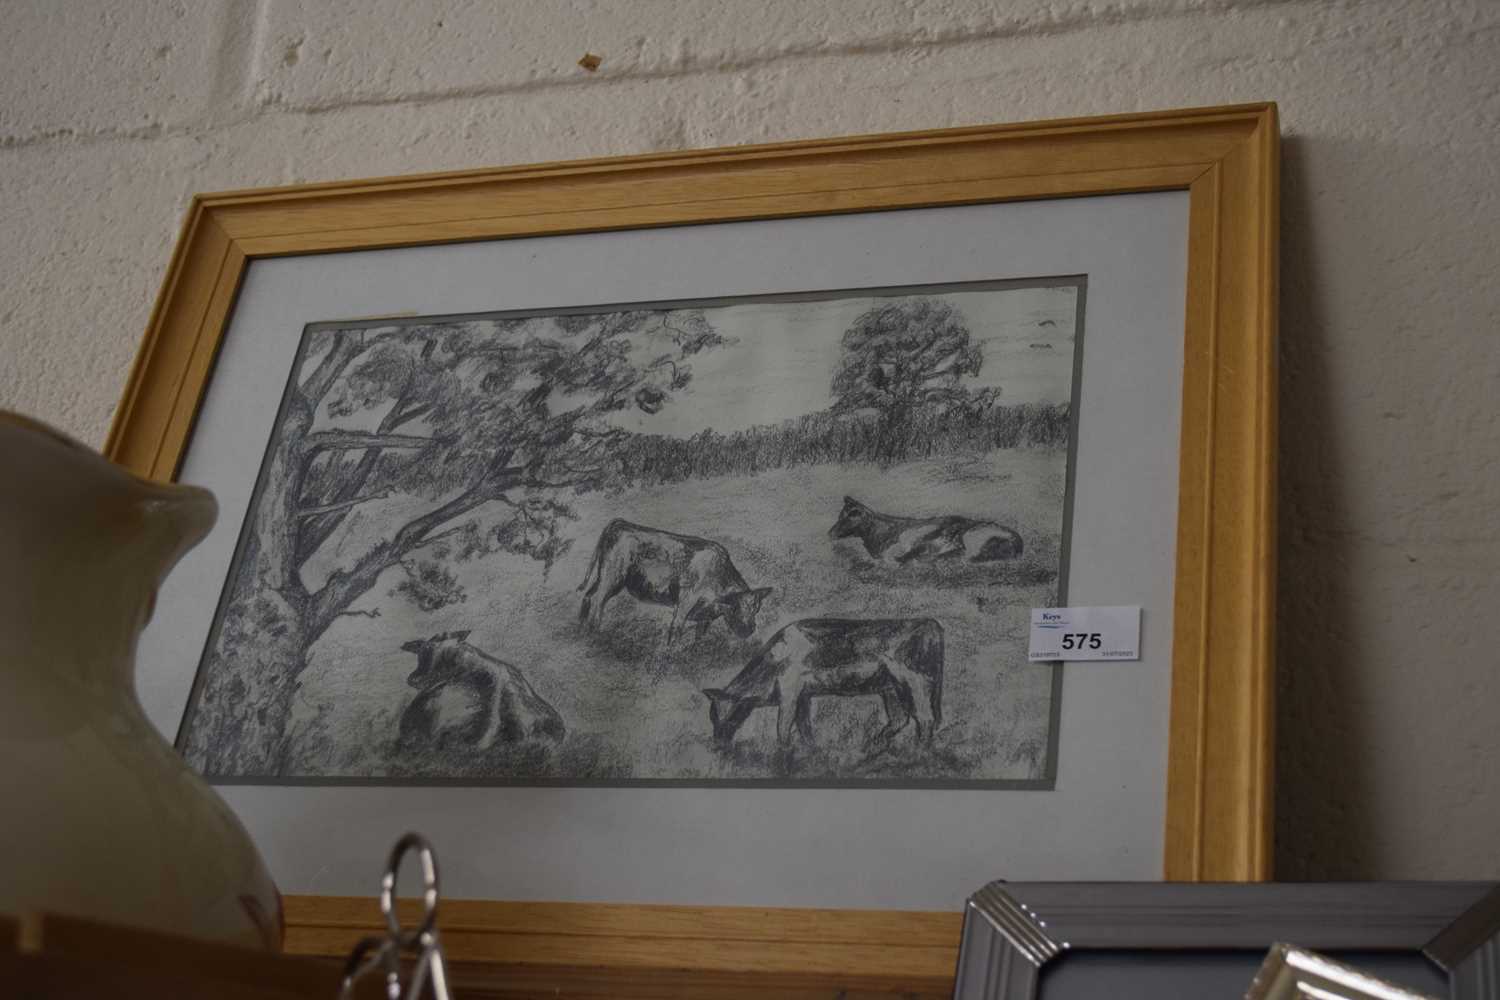 Pencil sketch of cows in a field, framed and glazed